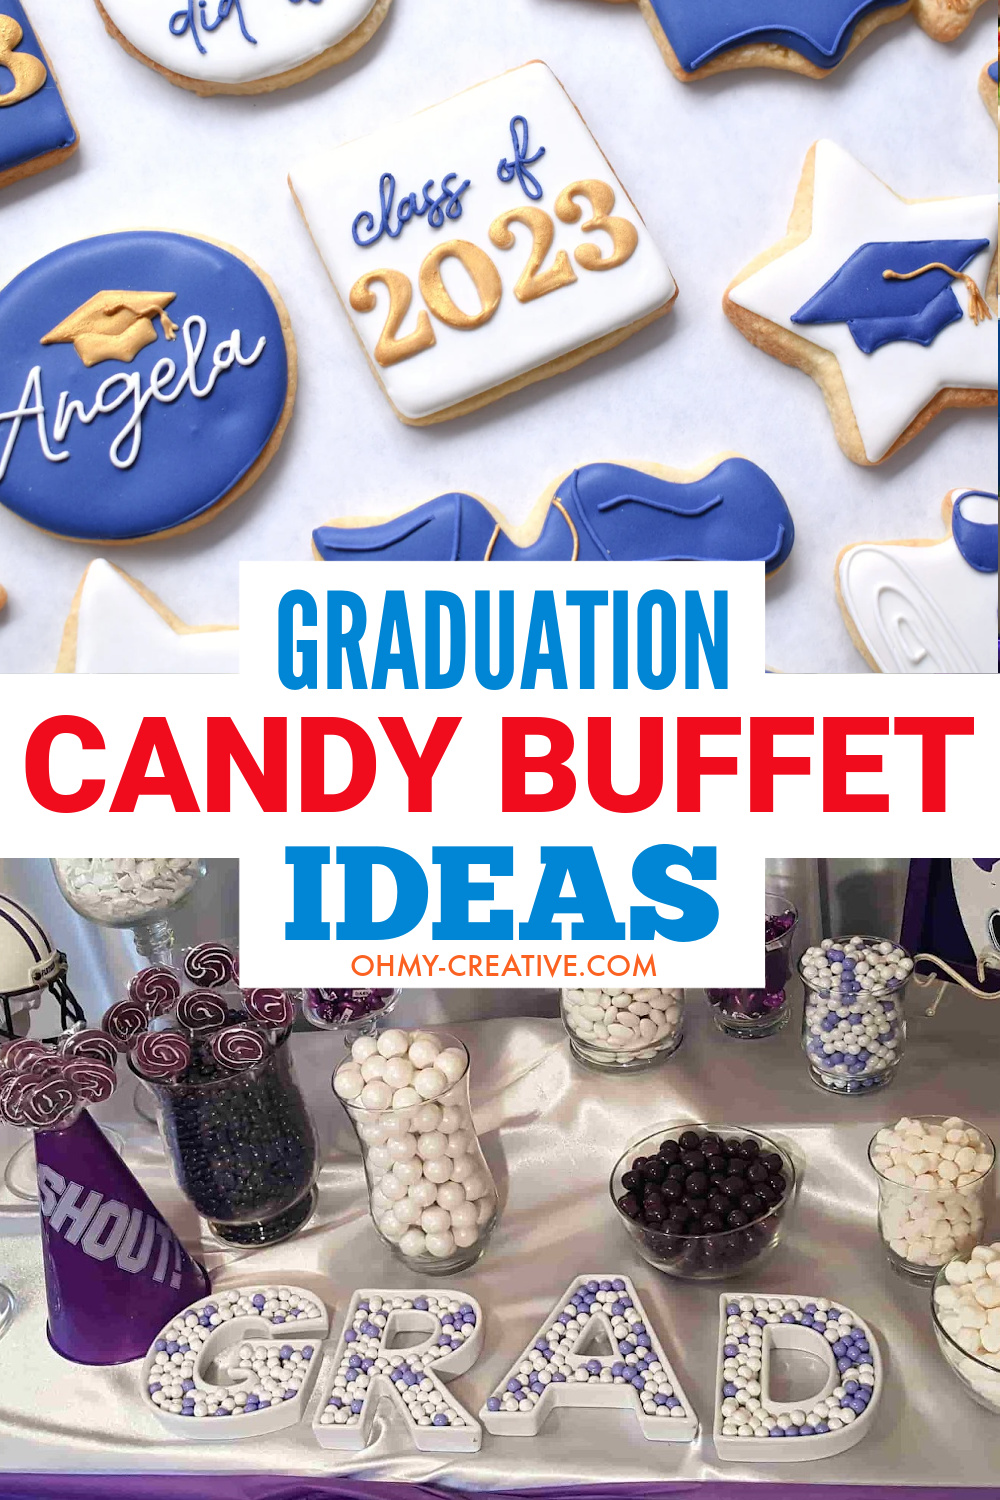 Graduation party candy buffet ideas including printable candy bar signs, fun candy bar jars and graduation cookies.